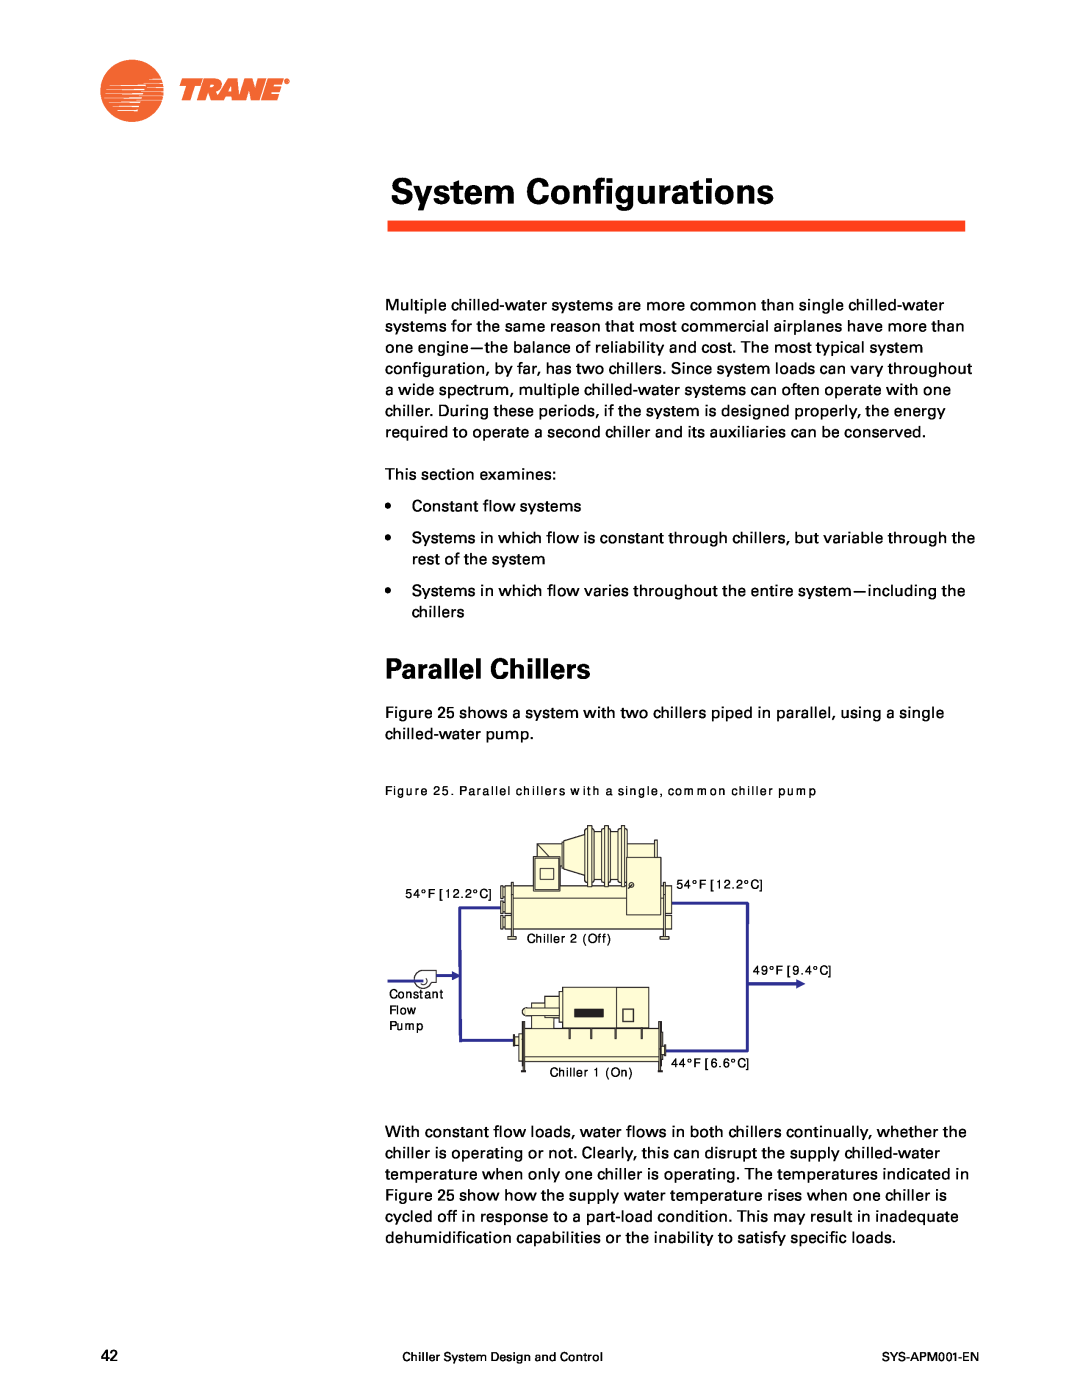 Trane SYS-APM001-EN manual System Configurations, Parallel Chillers 